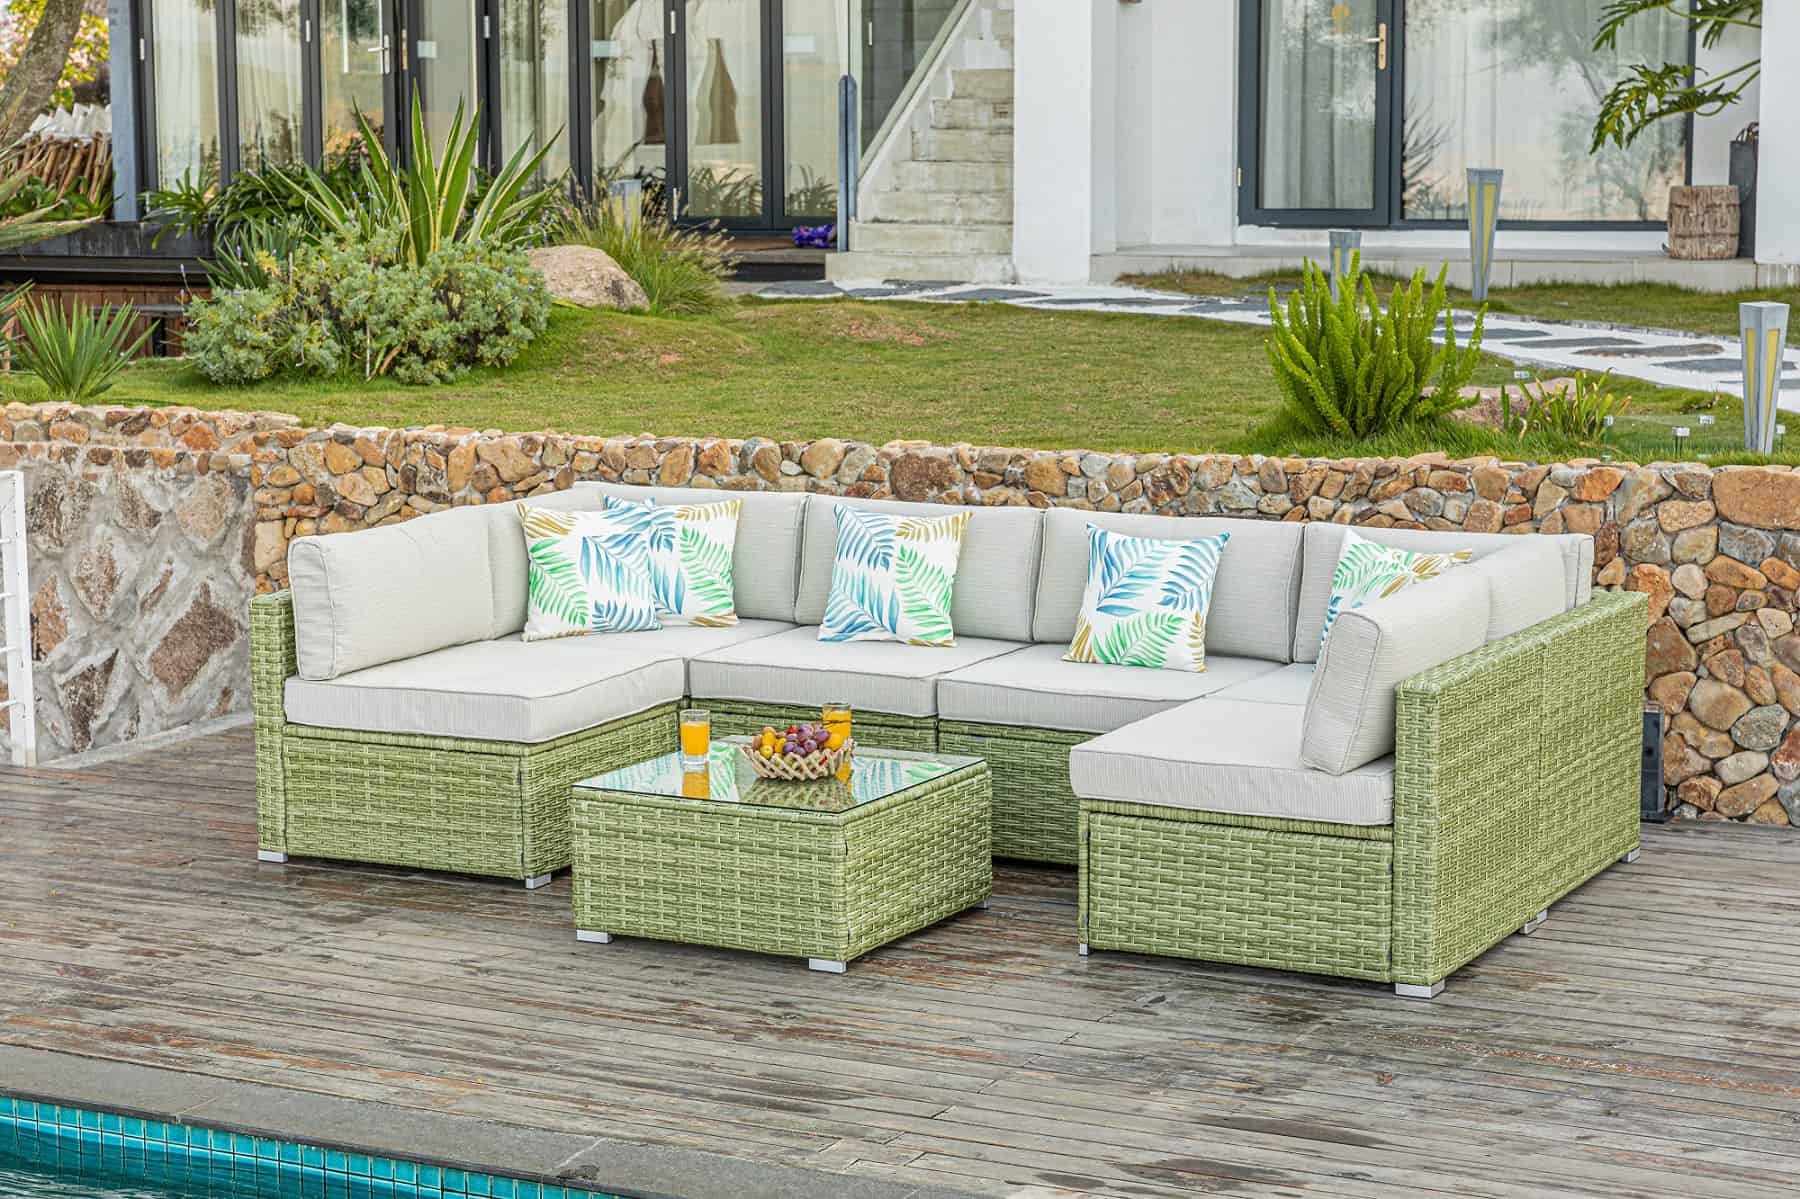 How To Protect Outdoor Resin Wicker Furniture